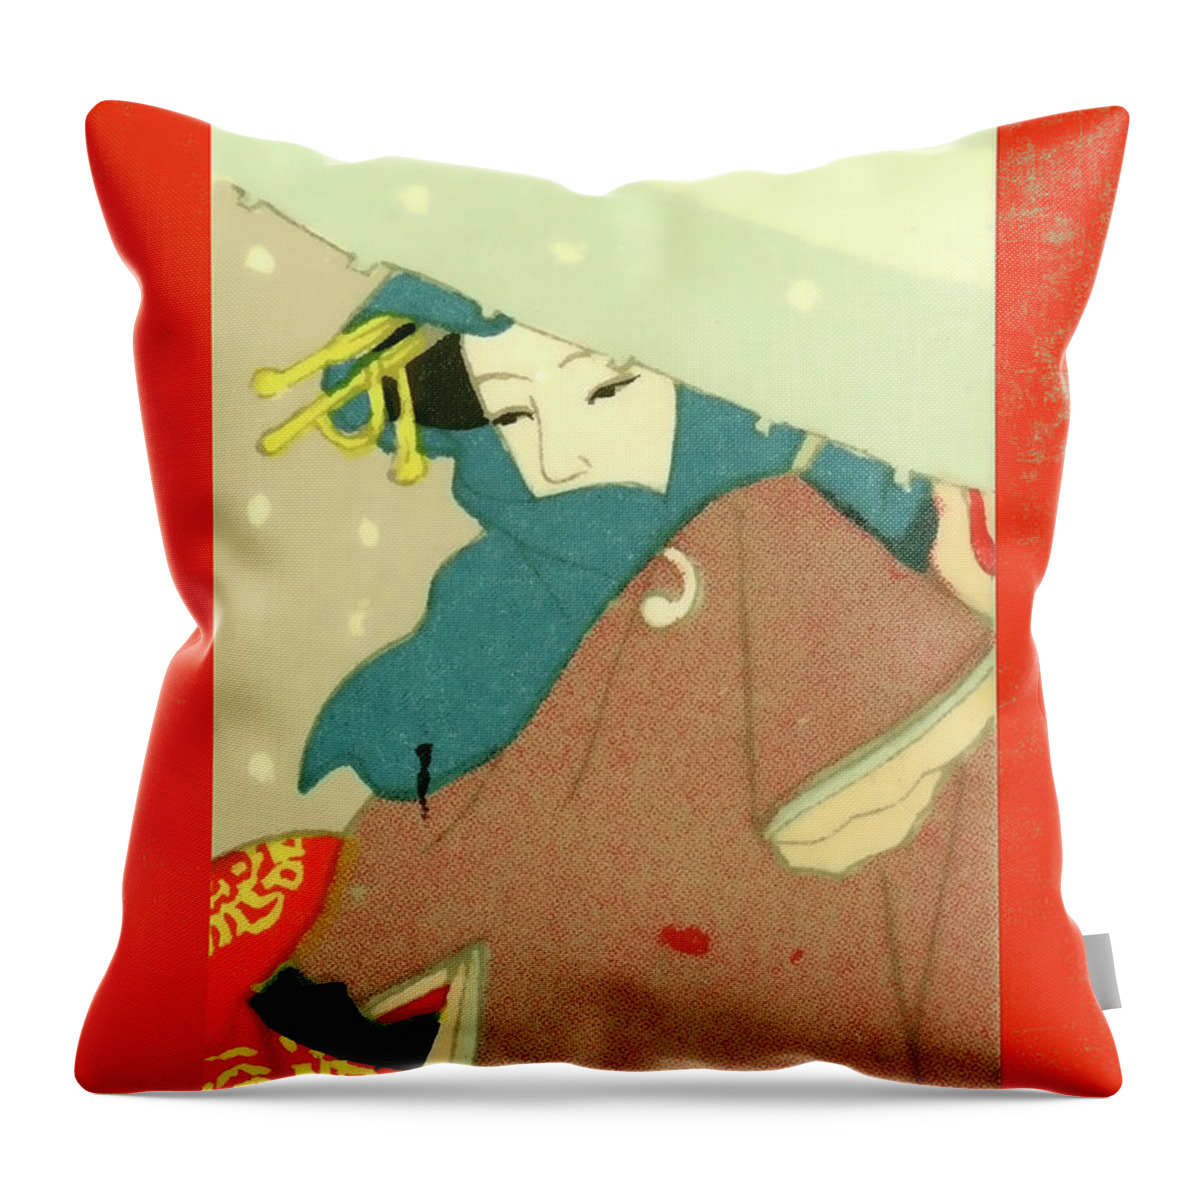 Japan Throw Pillow featuring the mixed media Designer Series Japanese Matchbox Label 136 by Carol Leigh